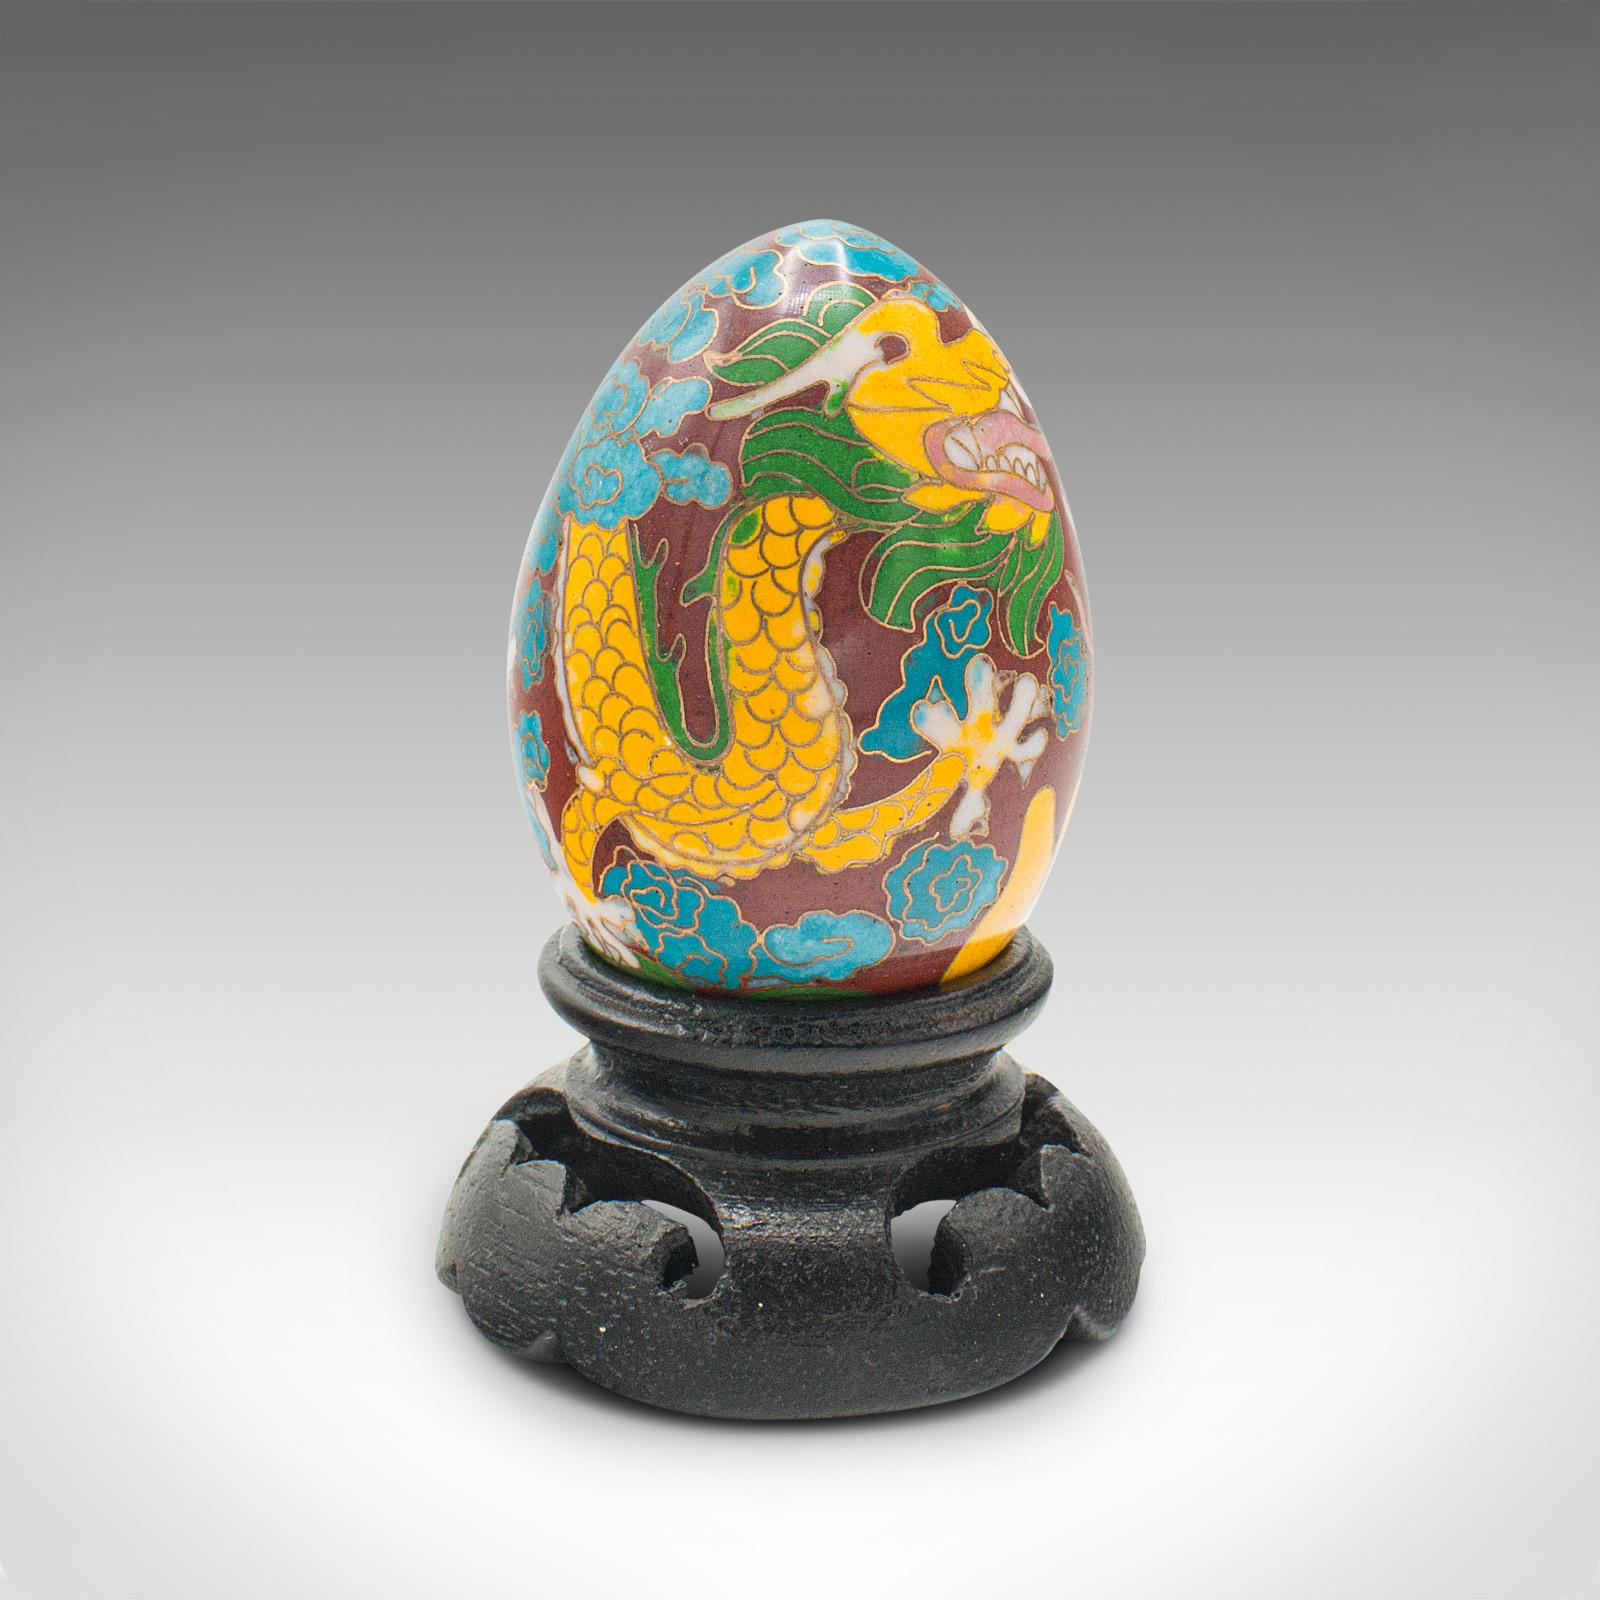 Small Vintage Cloisonne Decorative Egg, Chinese, Enamelled, Ornament, circa 1970 In Good Condition For Sale In Hele, Devon, GB